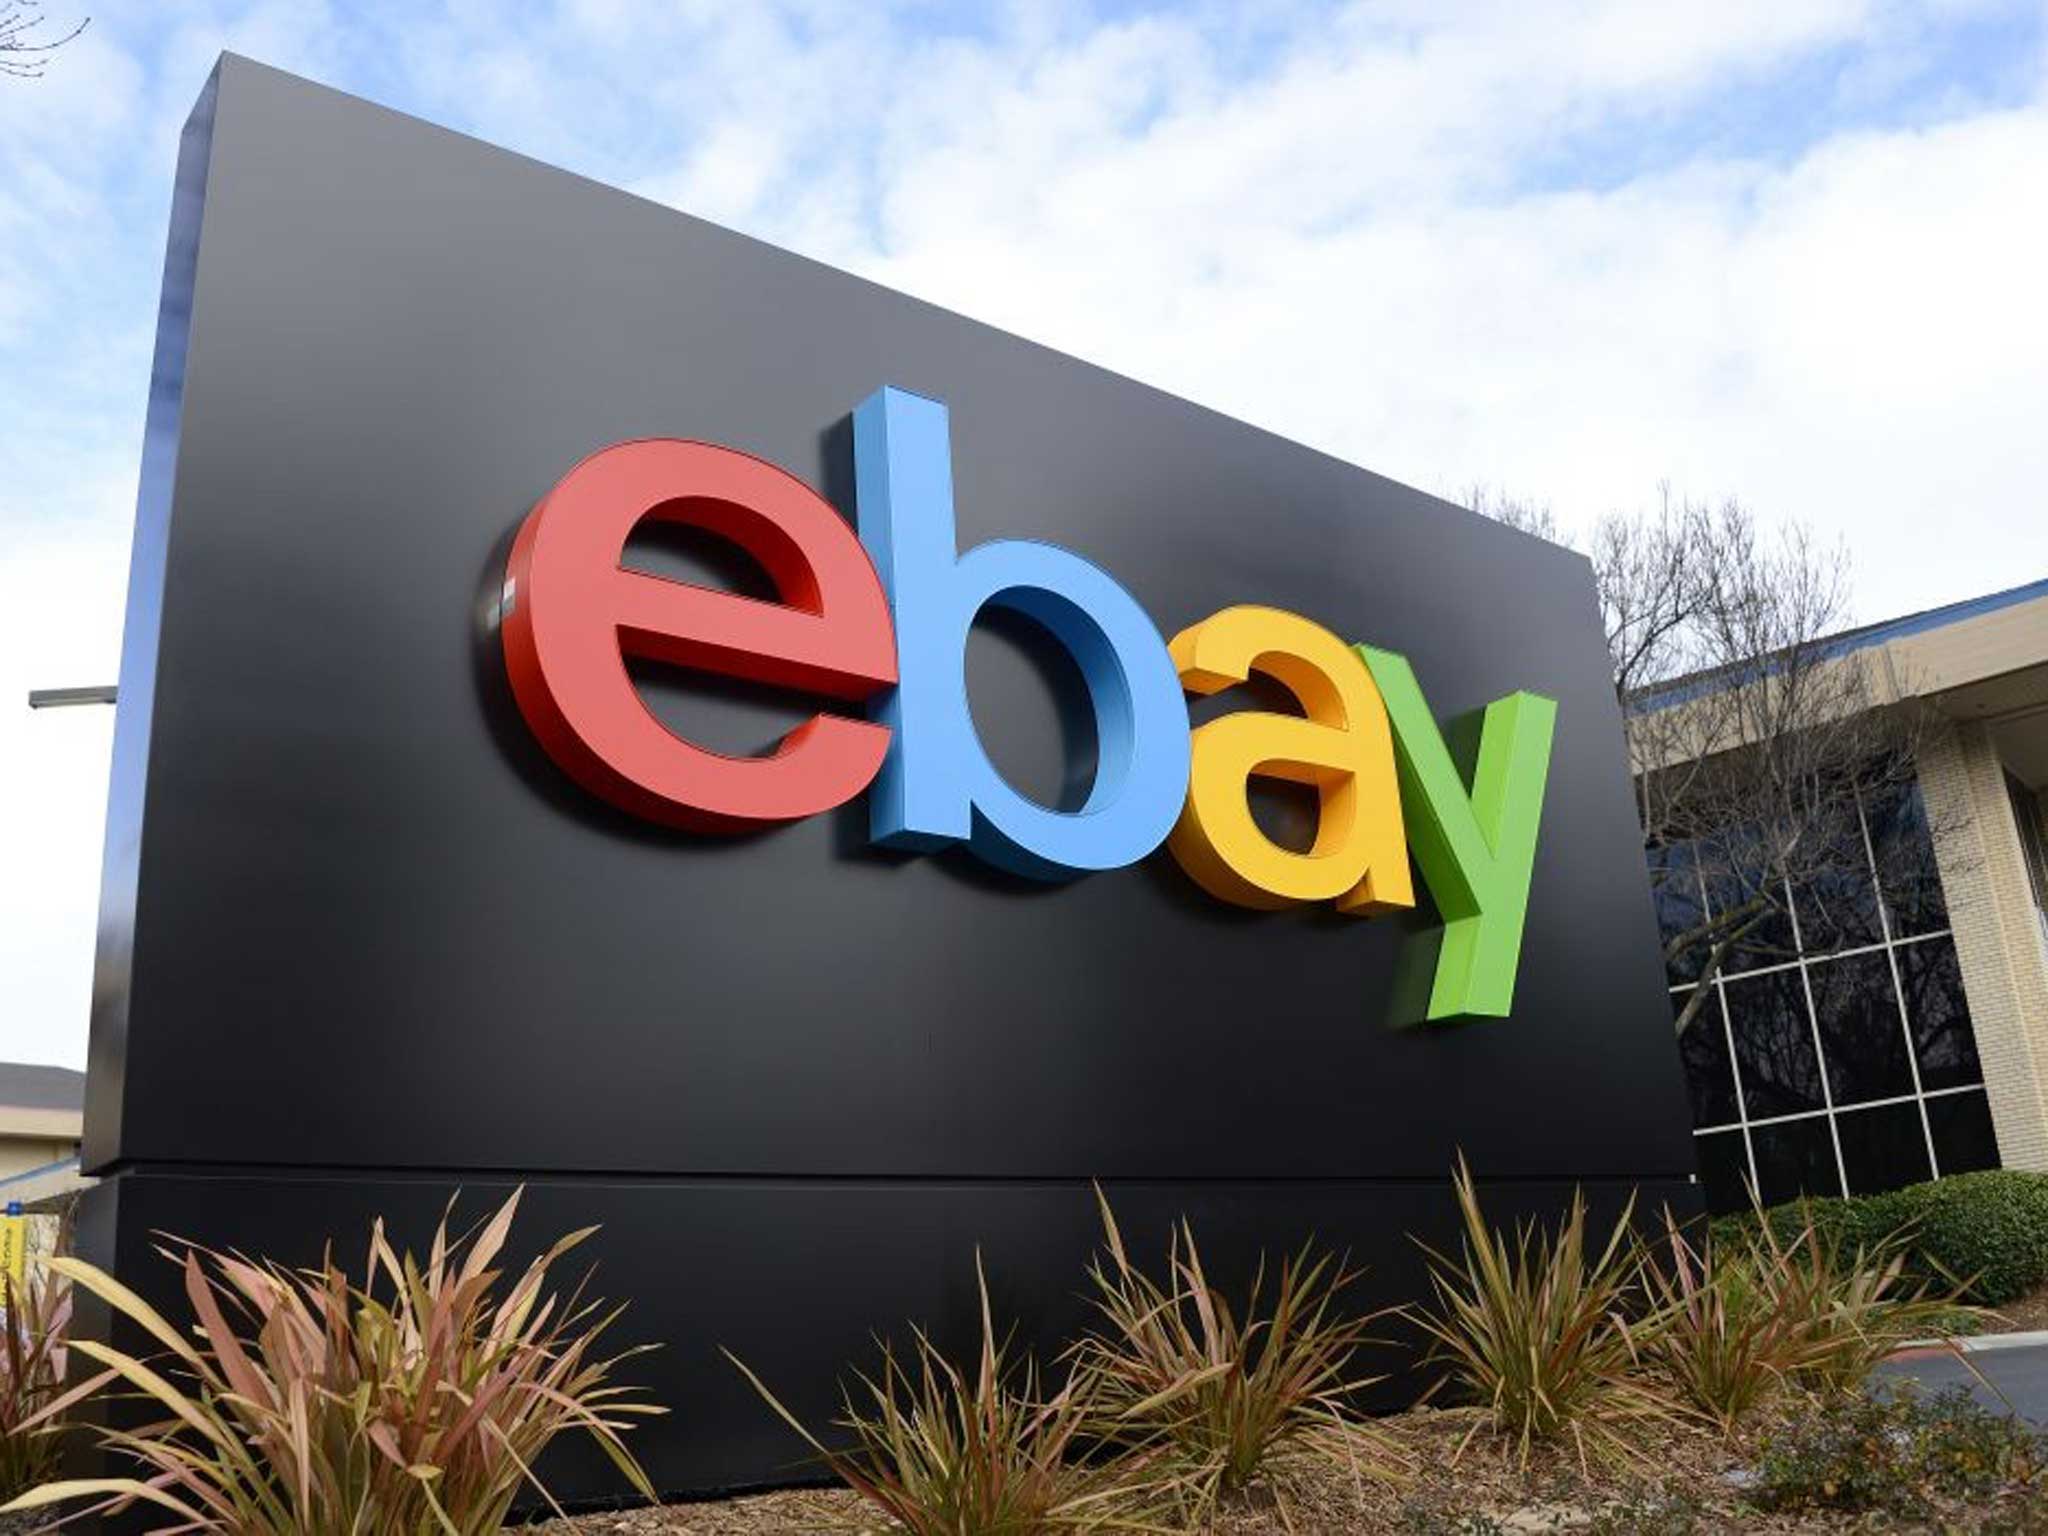 The hugely popular online auction site eBay has sparked outrage after a British newspaper found 'dozens' of items related to the holocaust listed for sale on the website.